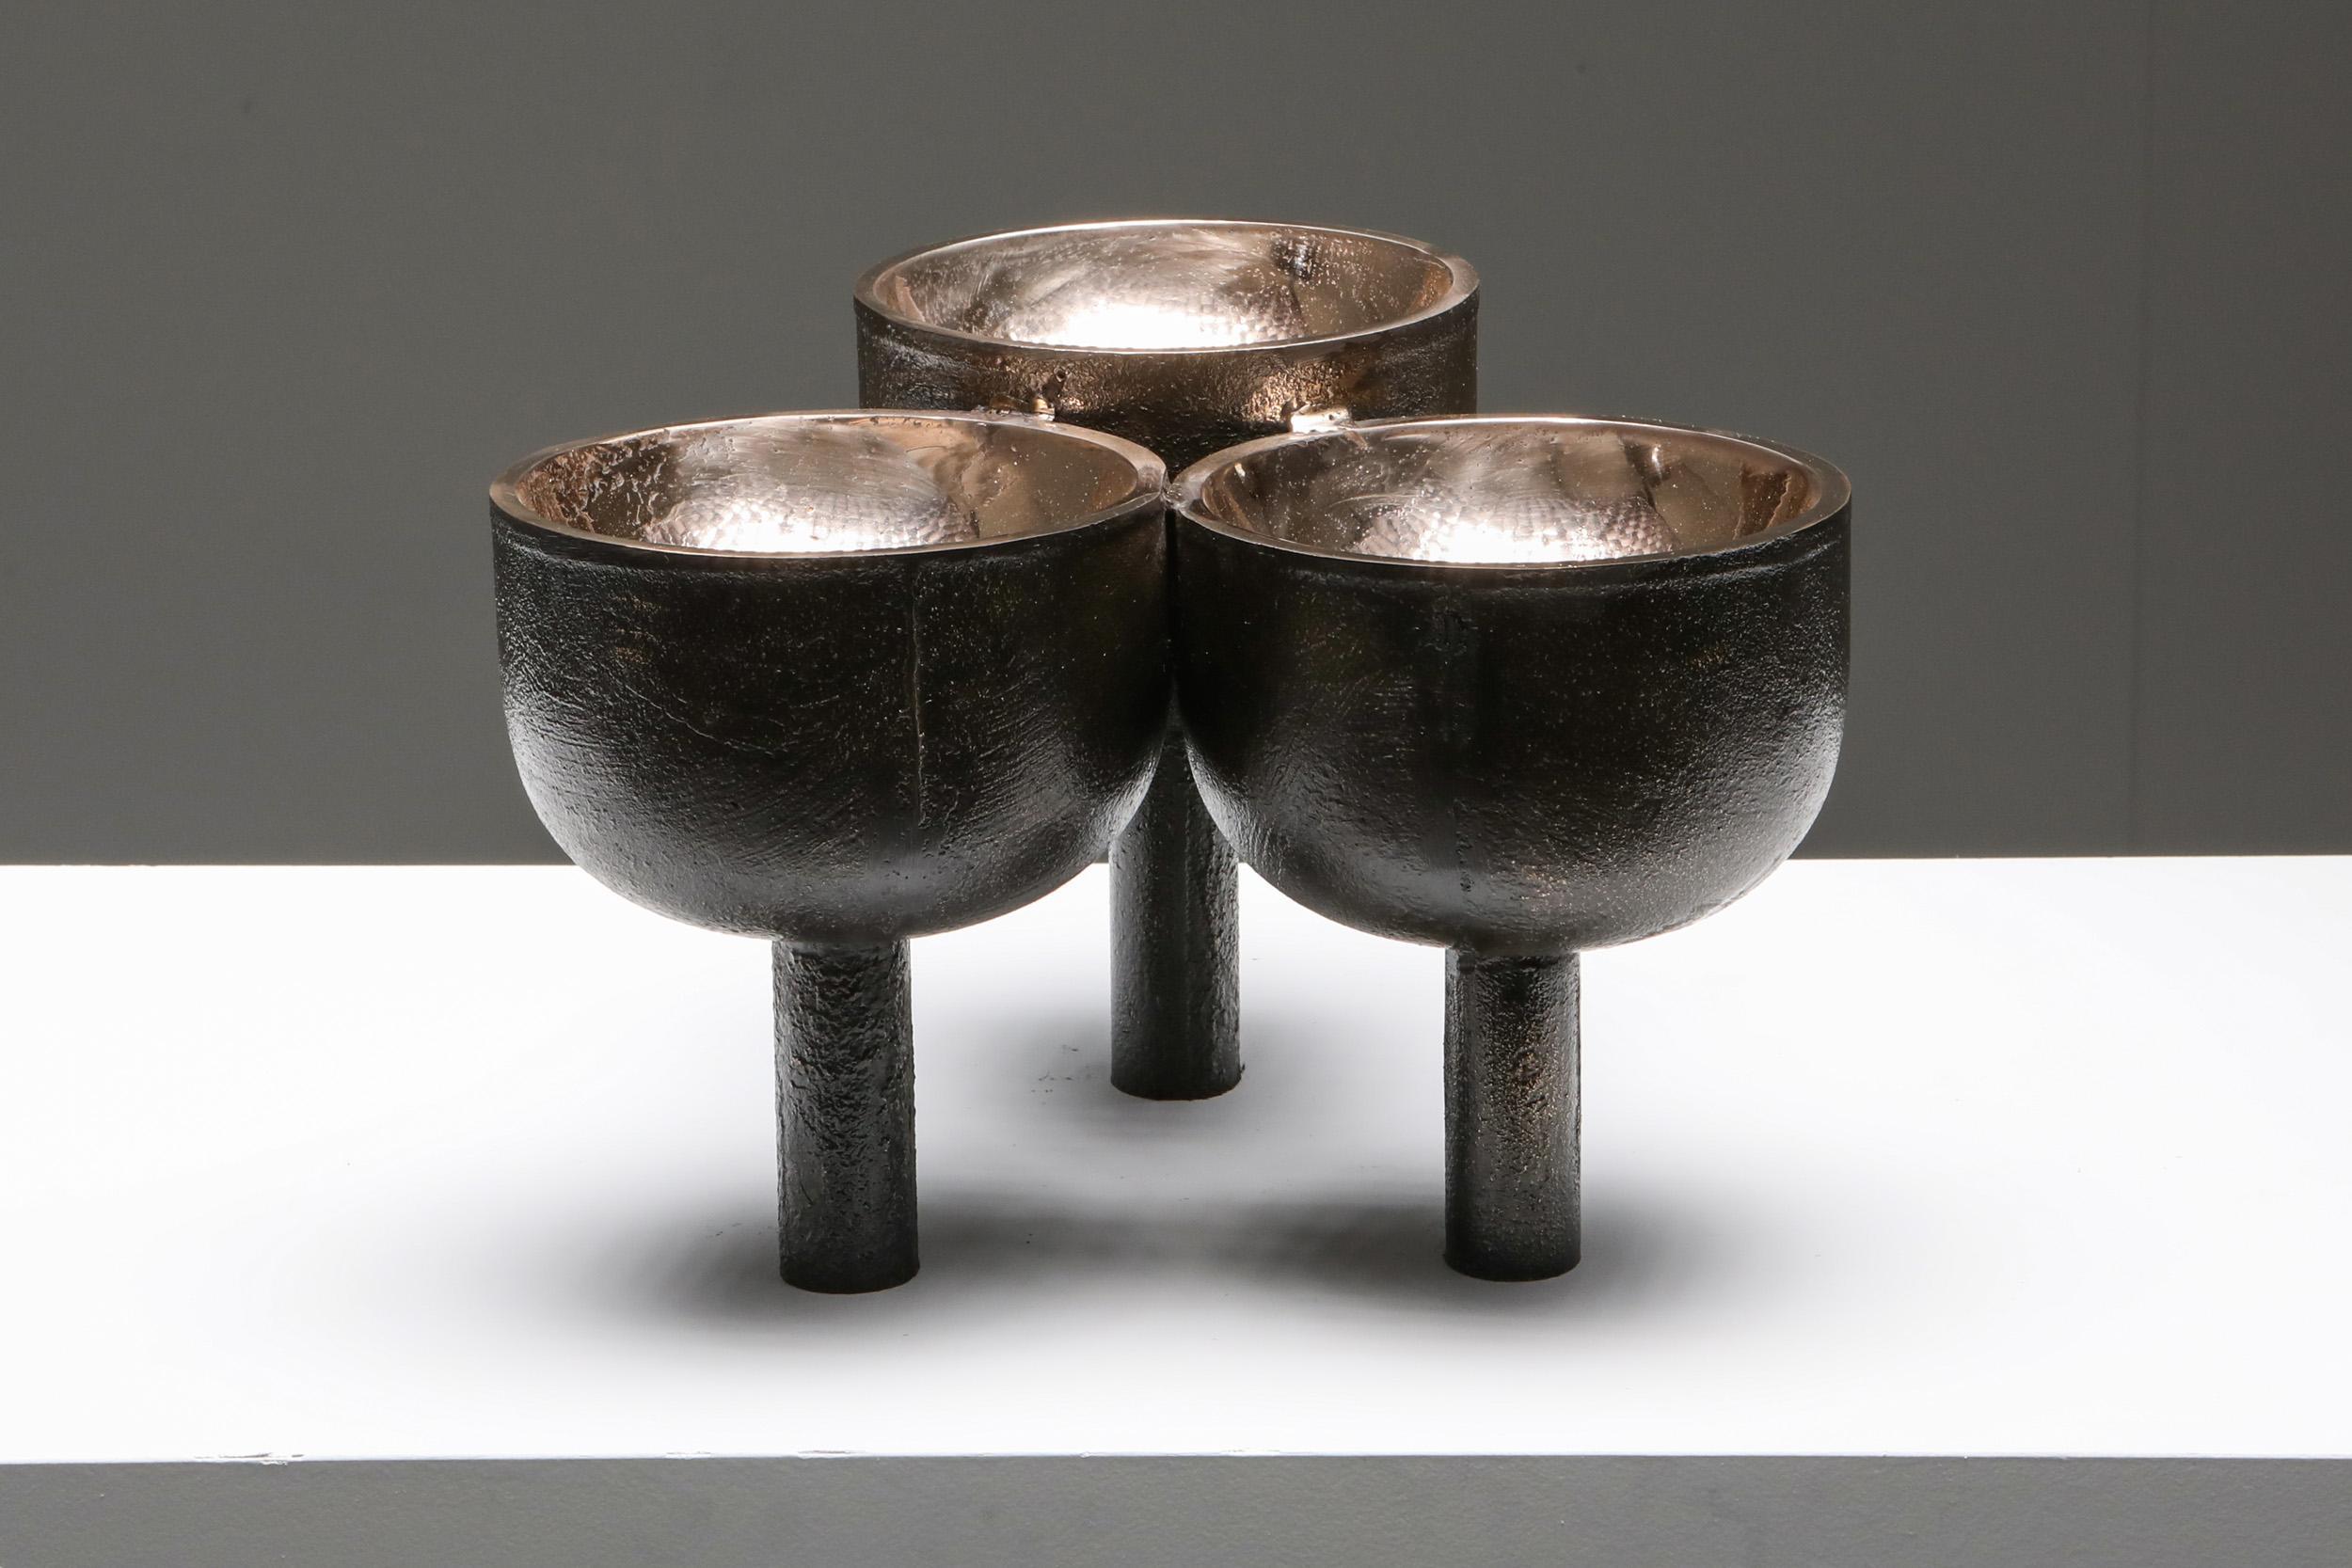 Bronze triple tray by Arno Declercq
Materials: pink bronze
Measures: W30 x D 28 x H 19 cm


Arno Declercq
Belgian designer and art dealer who makes bespoke objects with passion for design, atmosphere, history and craft. Arno grew up in a